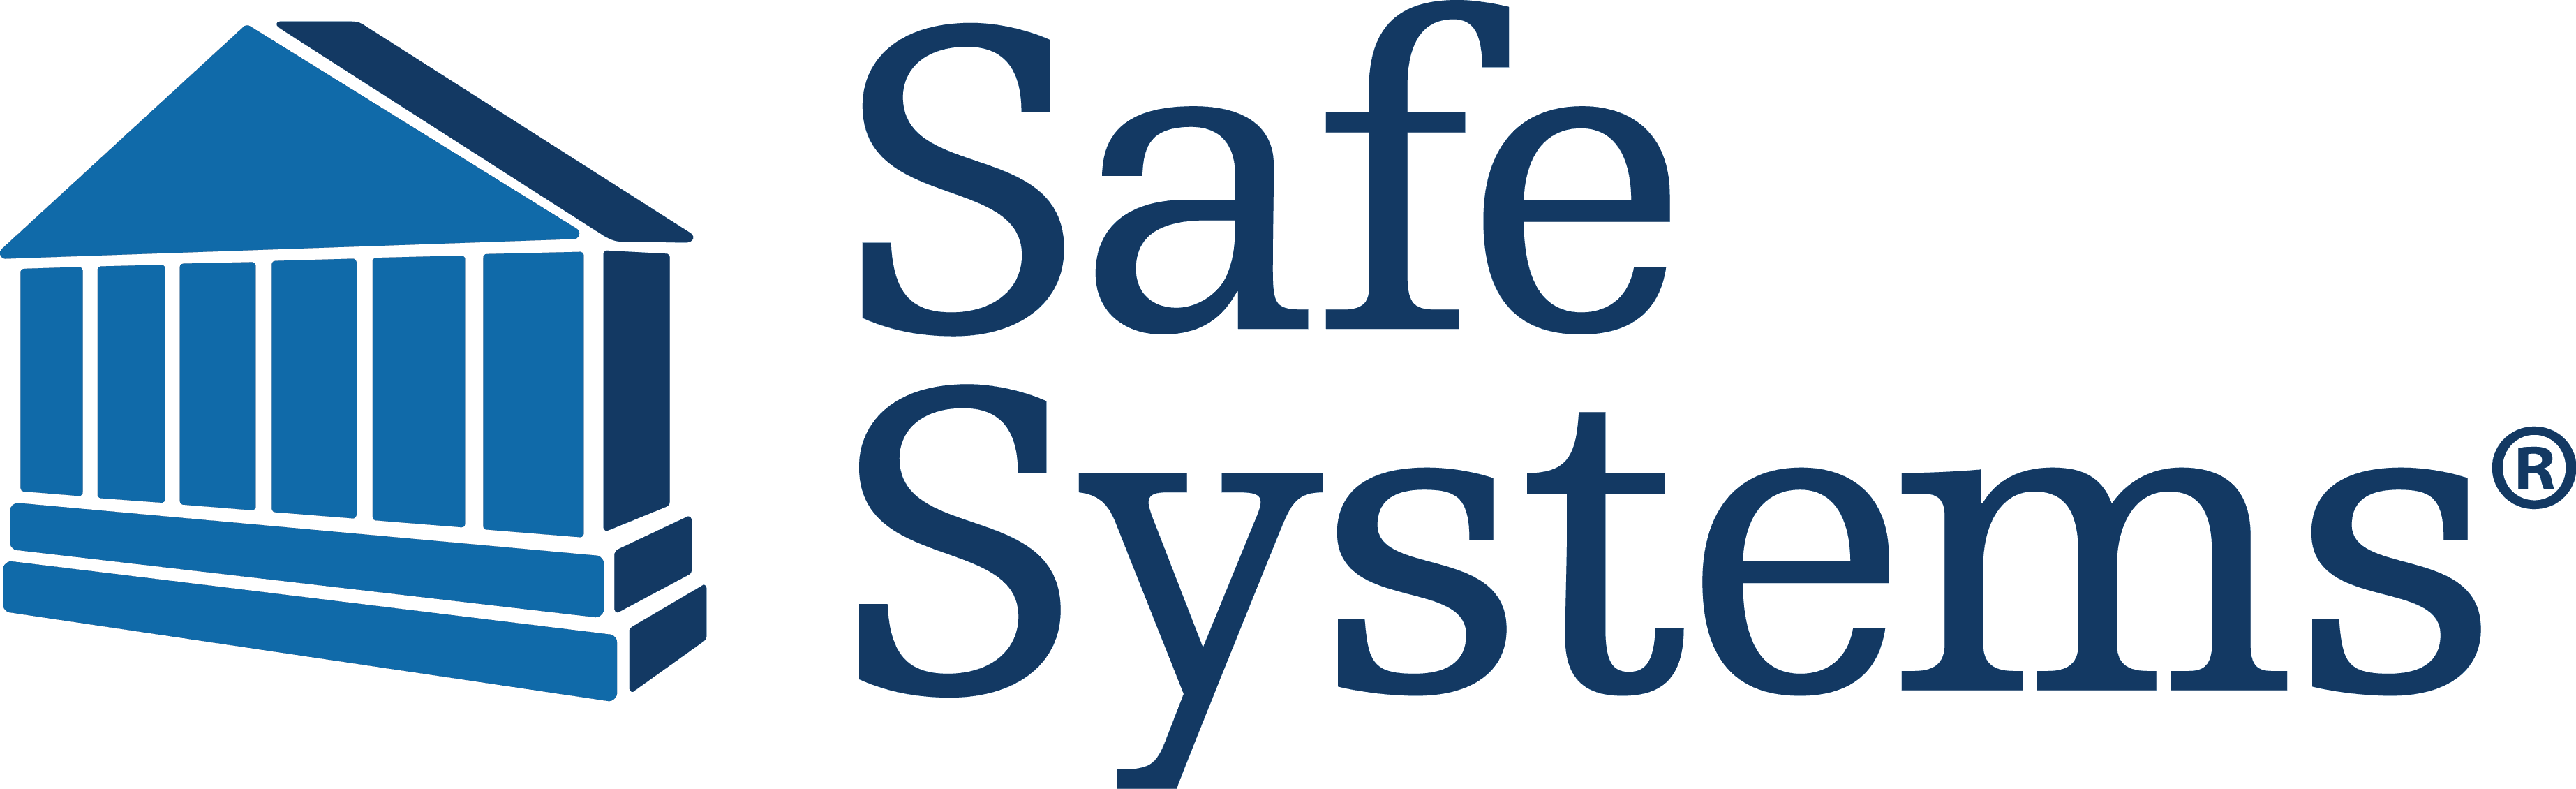 safe systems